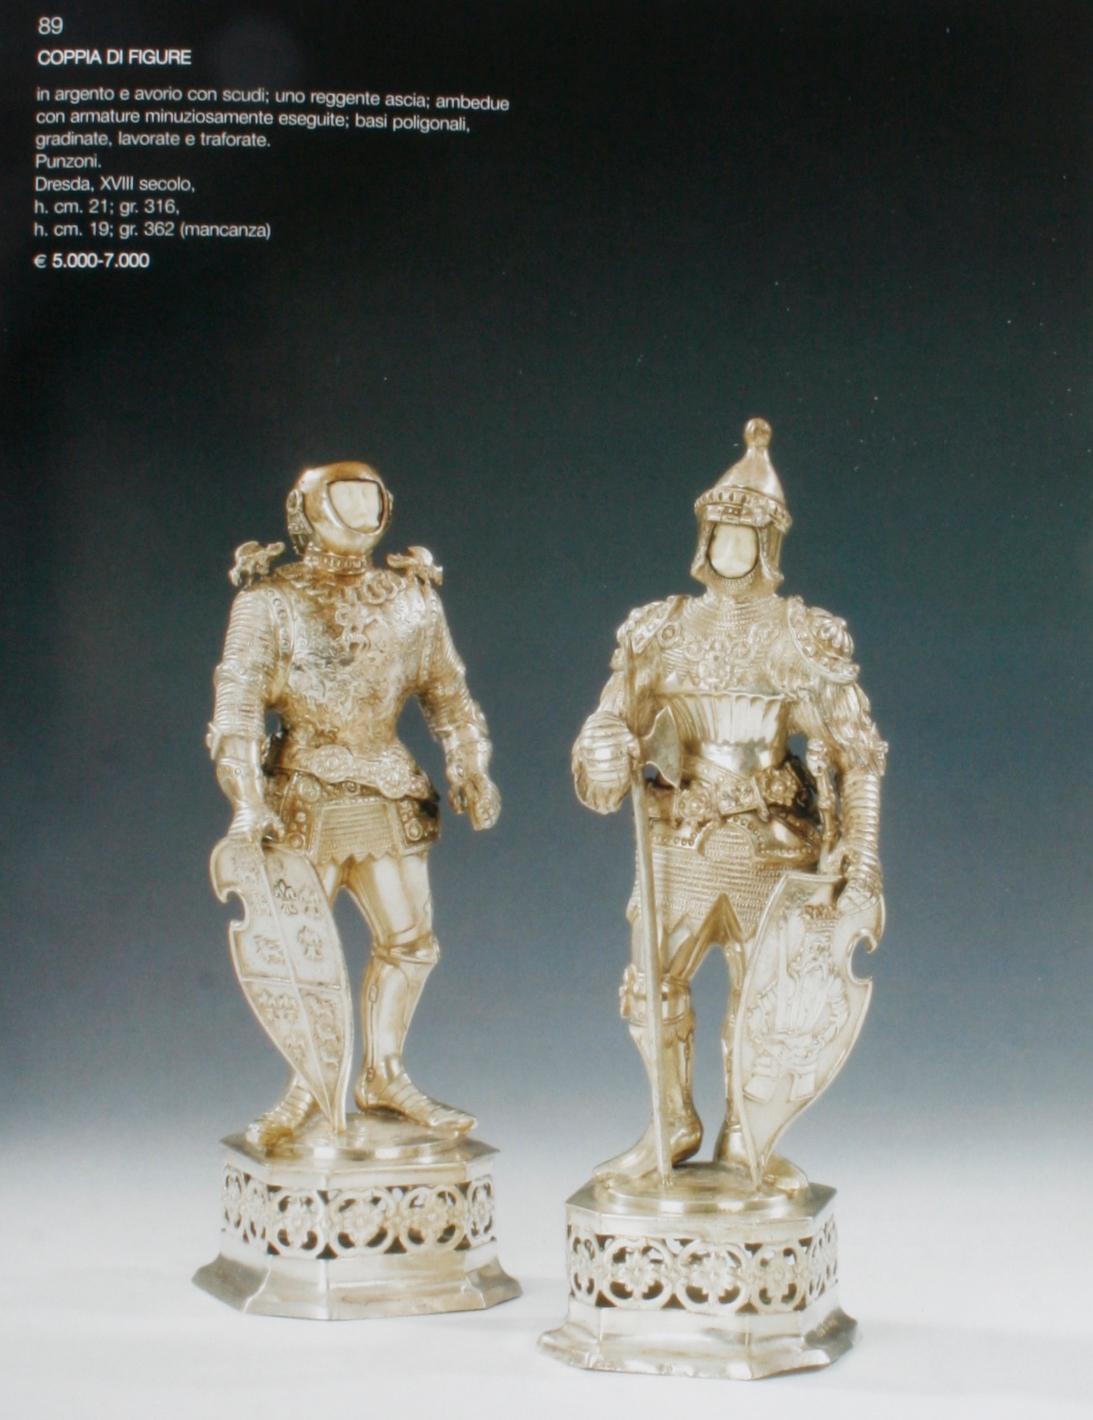 Auction Catalogue of Italian Fine Art, Silver, Ivory, and Venetian Objects, 2006 In Good Condition For Sale In valatie, NY